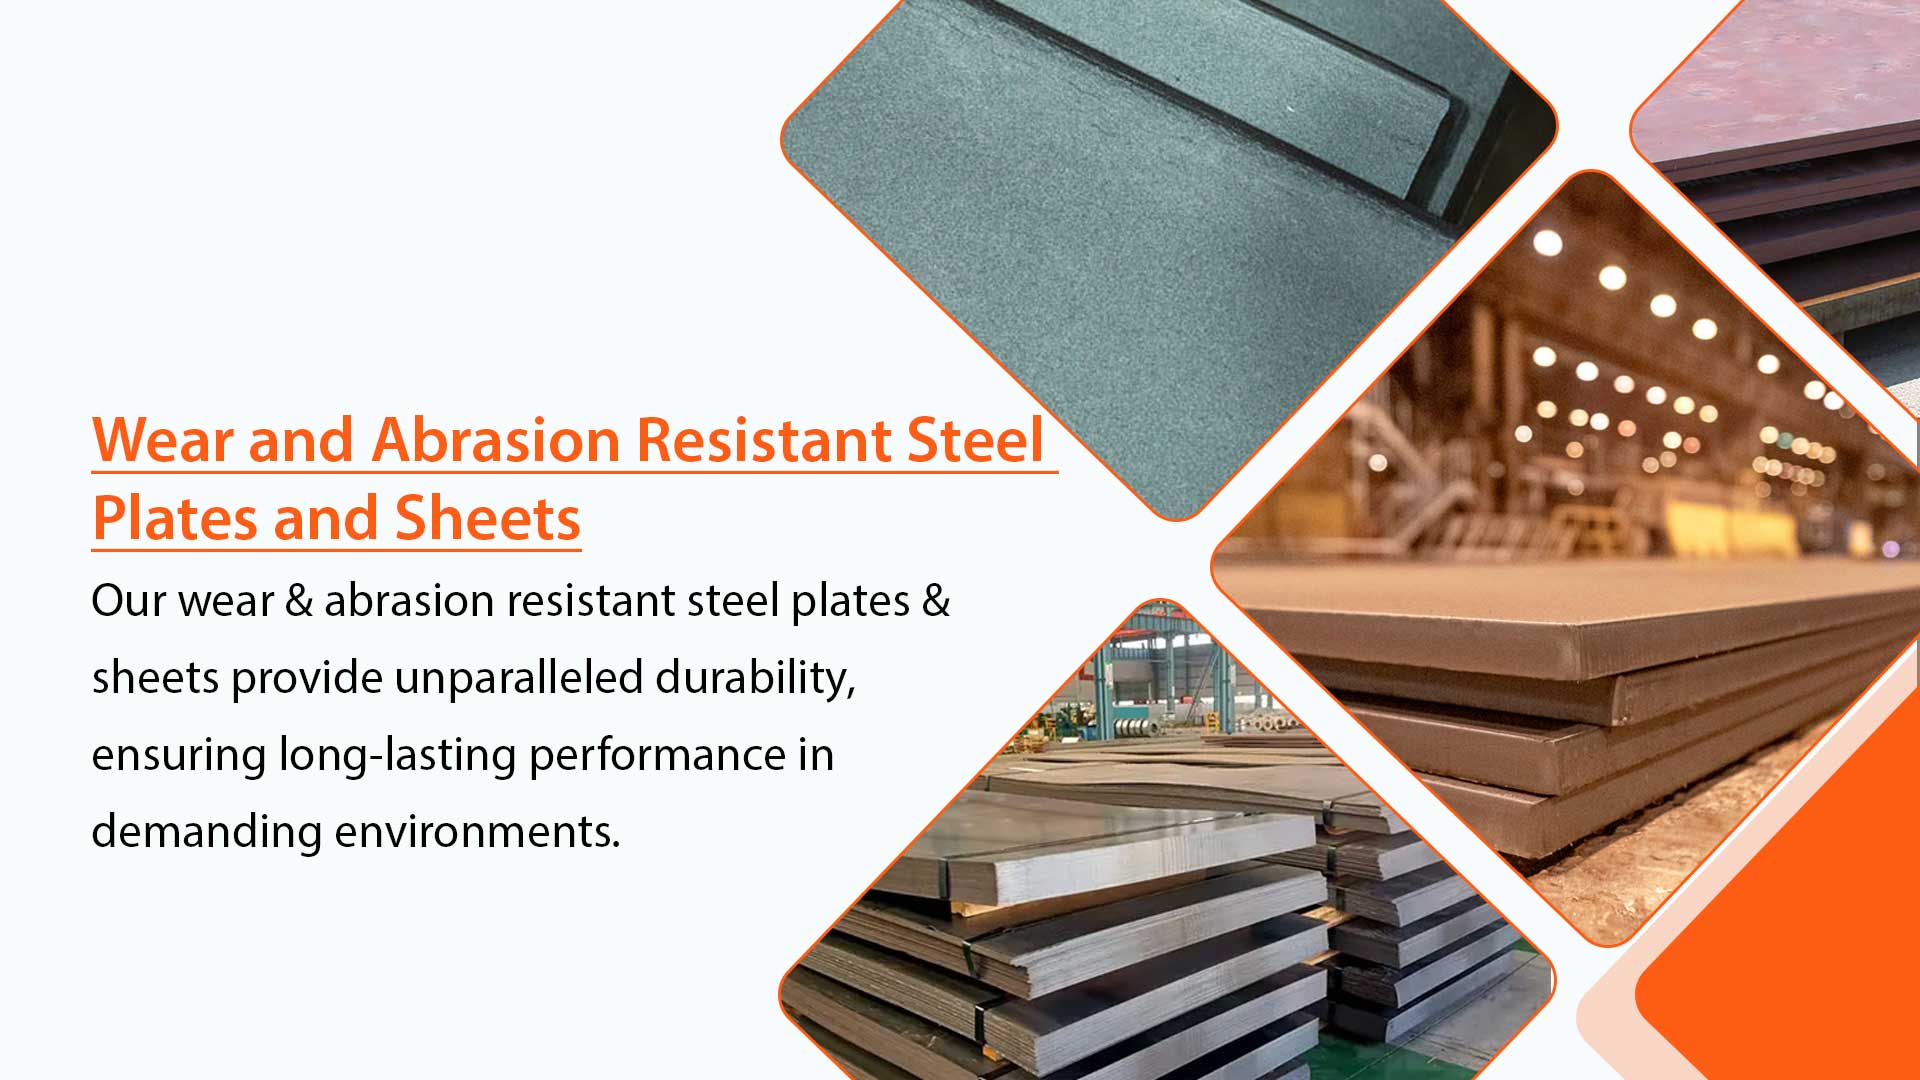 Wear and Abrasion Resistant Steel Plates and Sheets in Mumbai